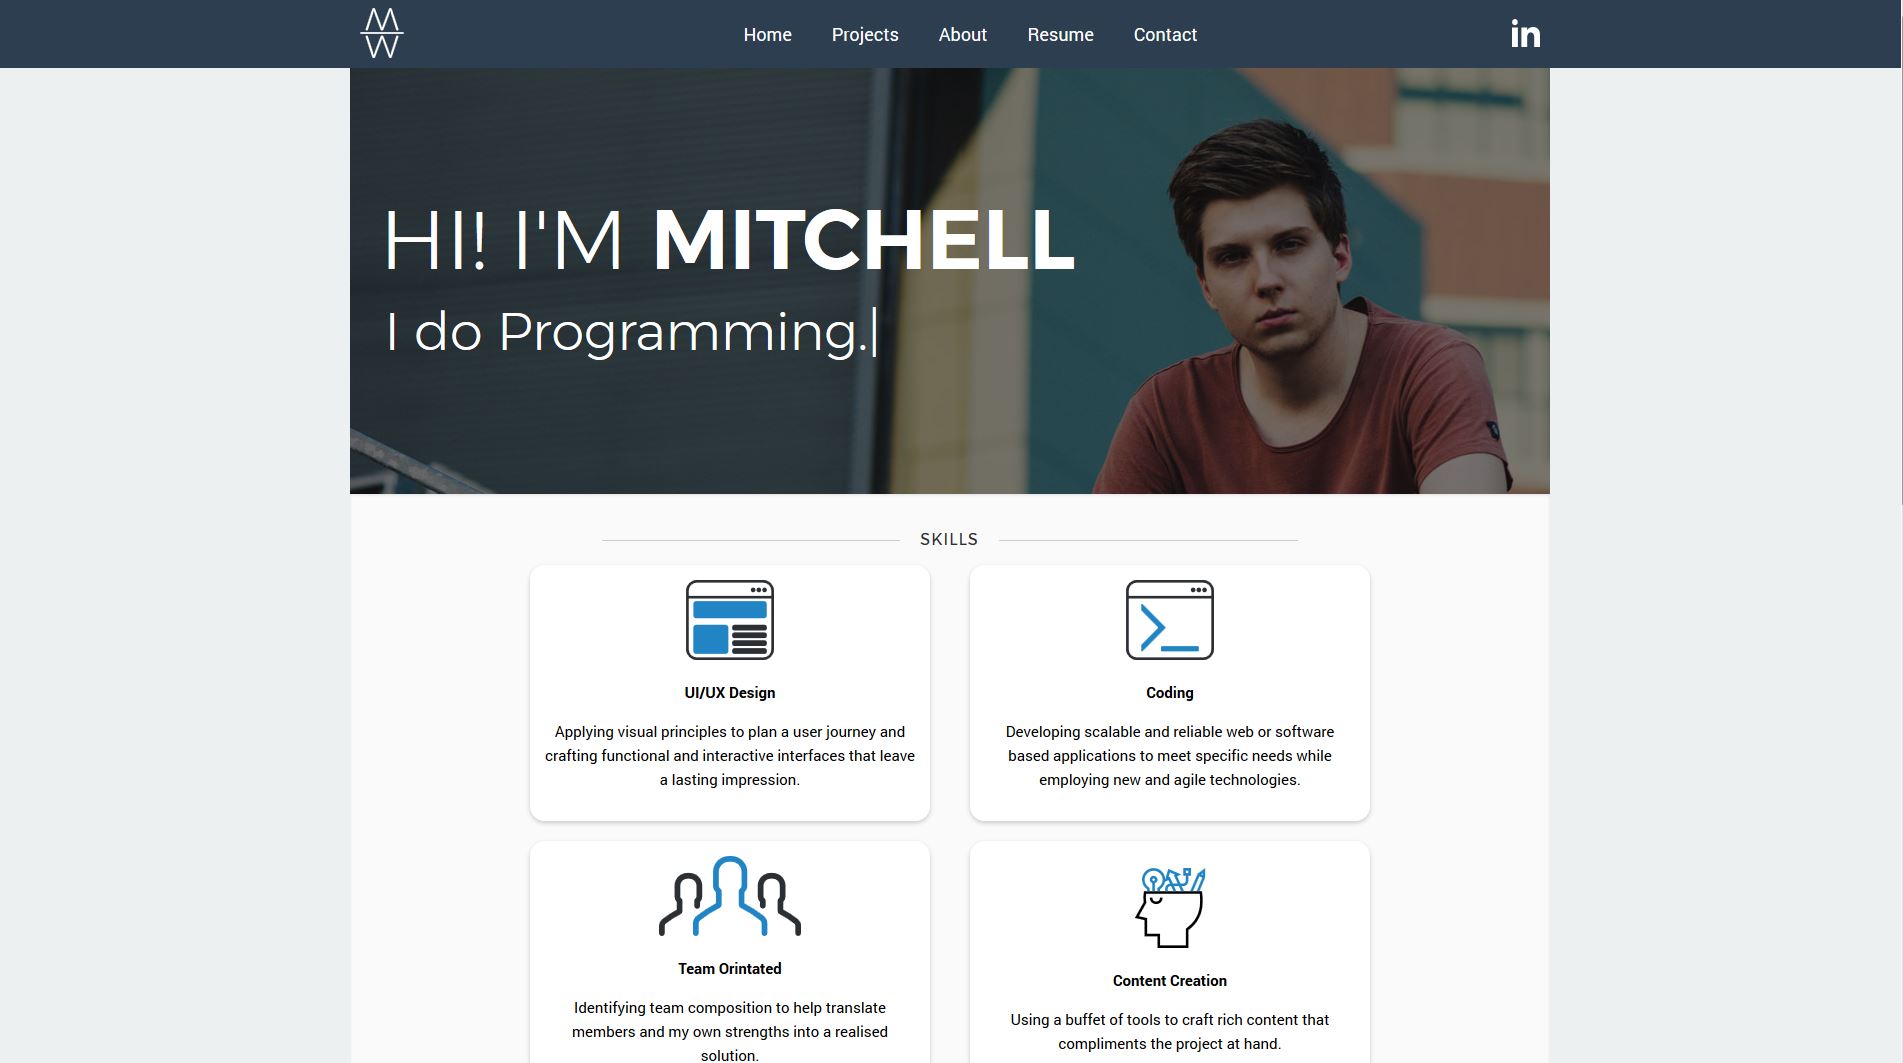 A screenshot of the home page of my personal website mitchell-williams.com.au